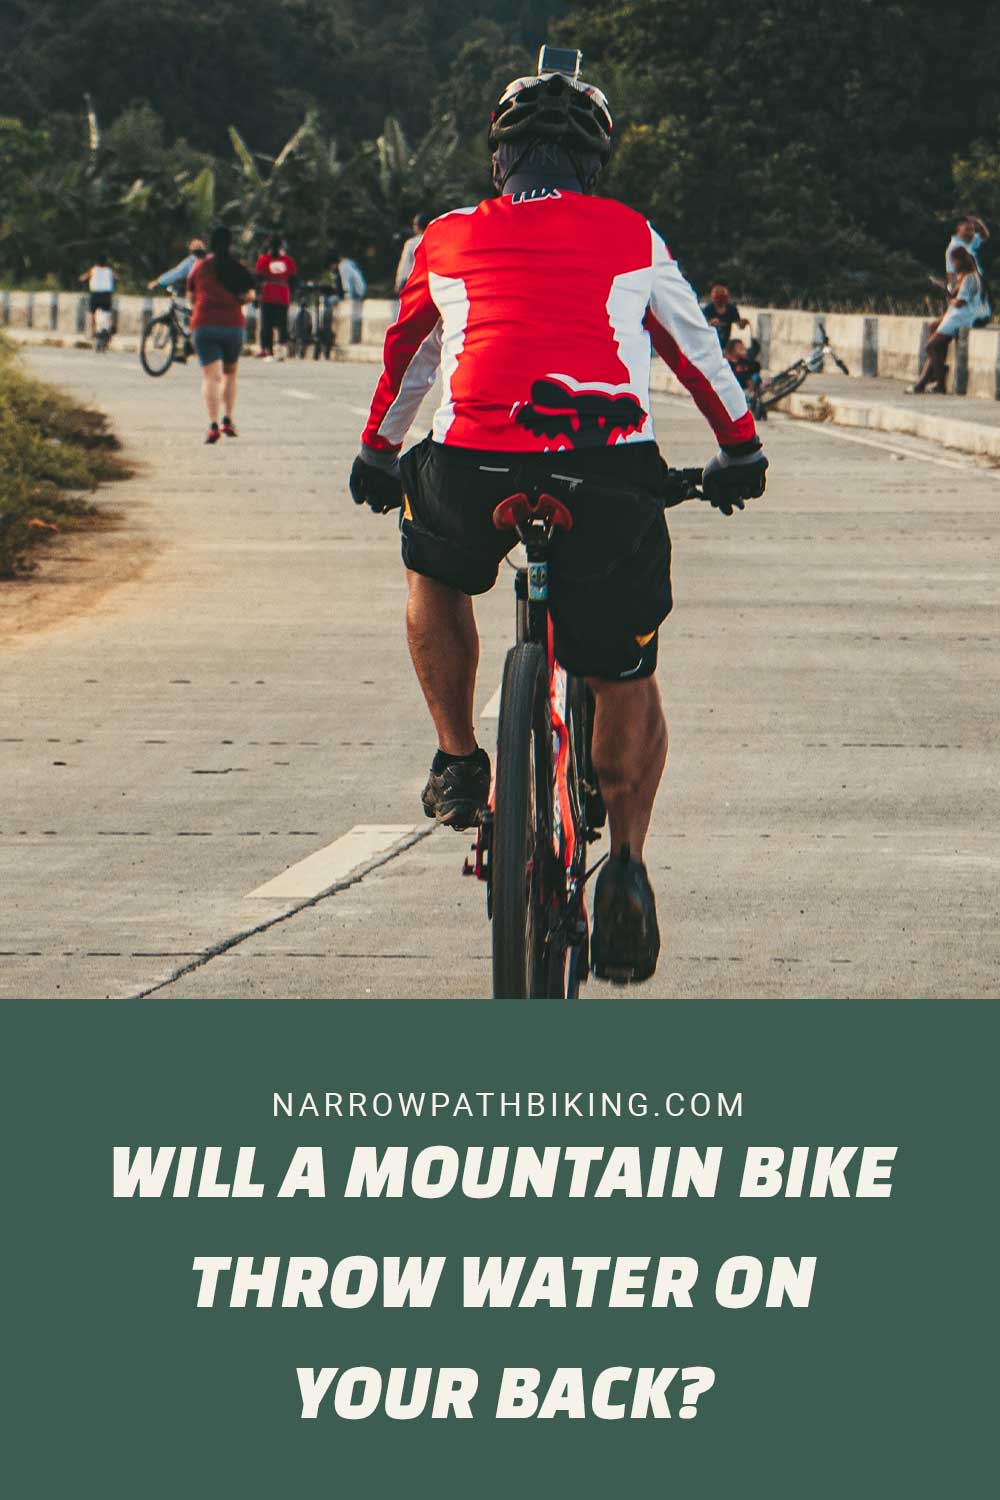 Person wearing a red and white shirt in a bicycle - Will a Mountain Bike Throw Water on your Back?